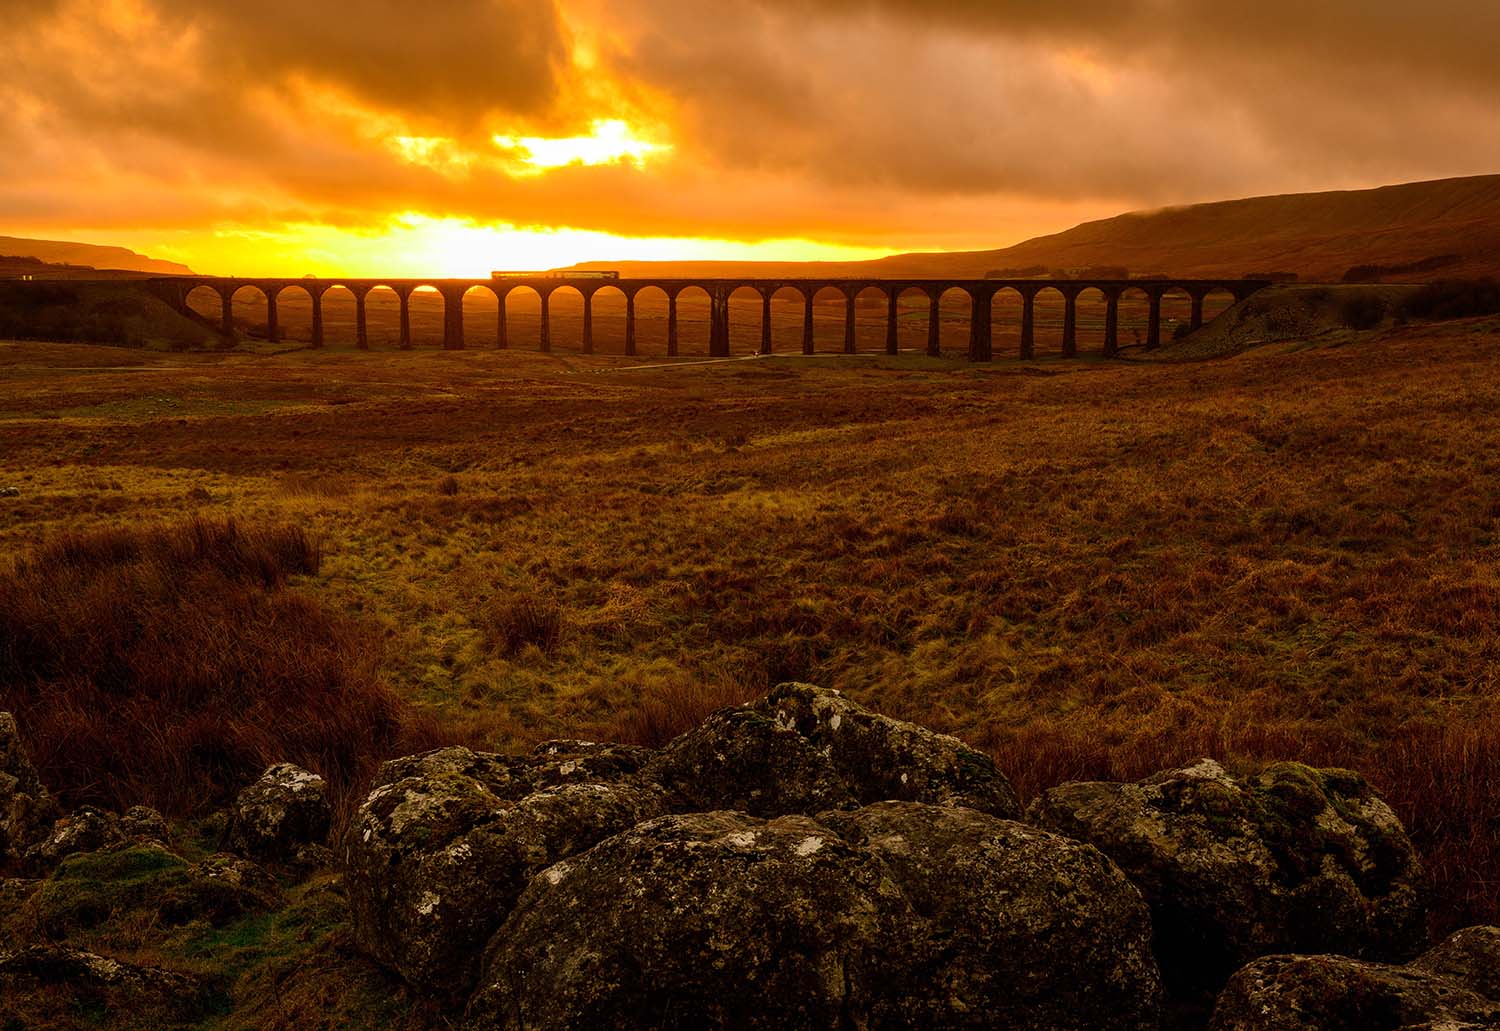 Exploring England By Train: 3 Exciting Railway Trips To Explore The Beauty Of England